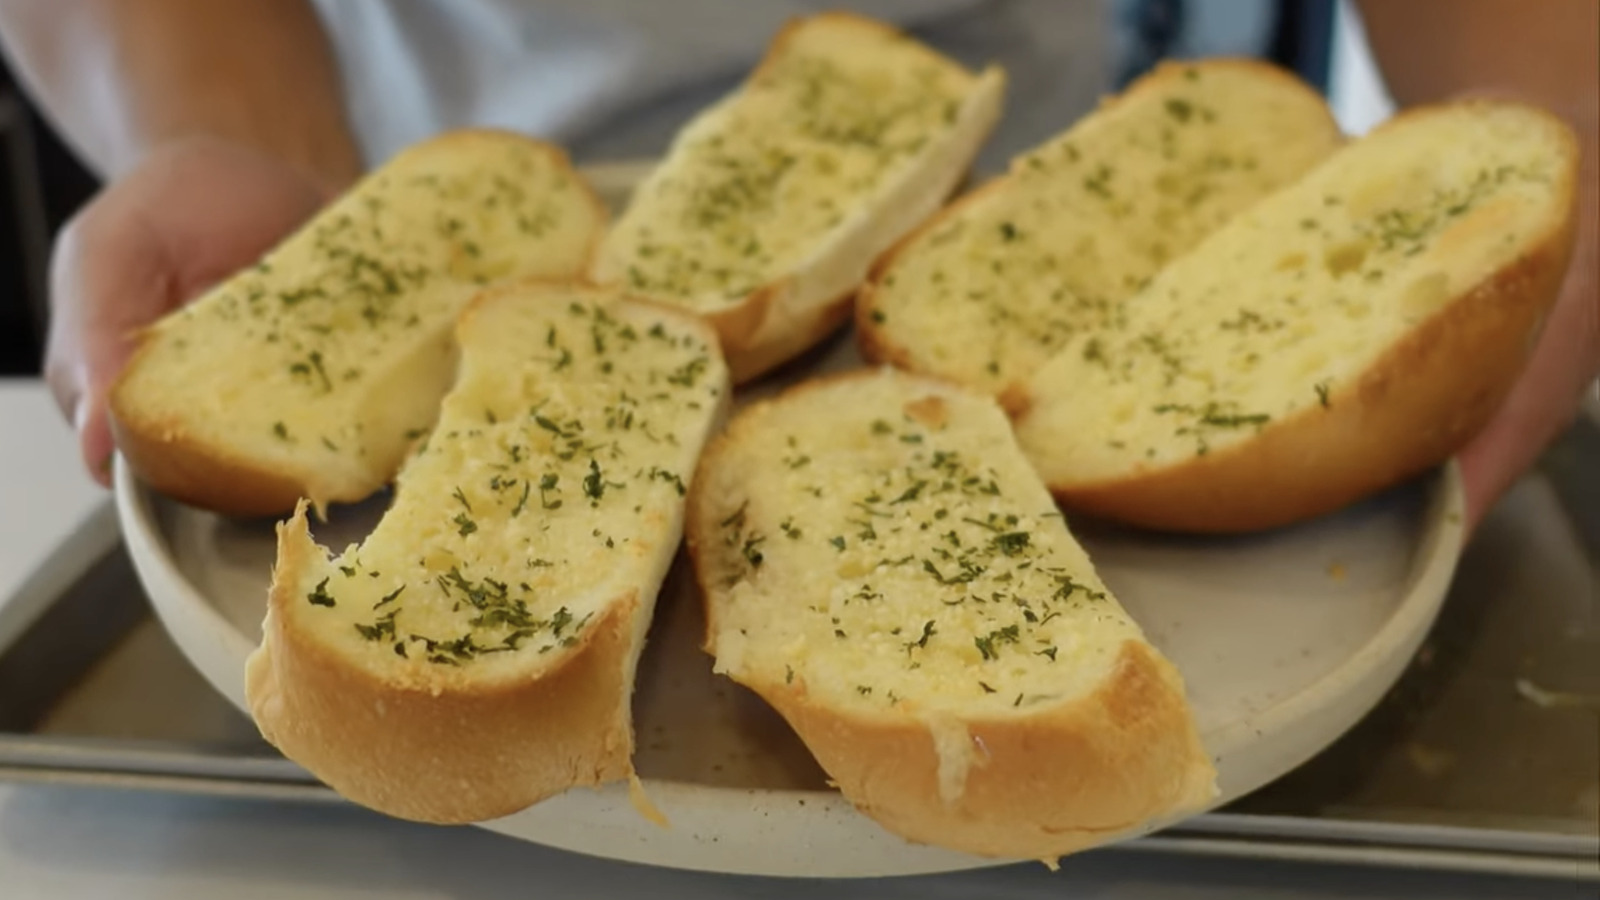 Turn your hot dog bun into garlic bread for a savory flavor experience